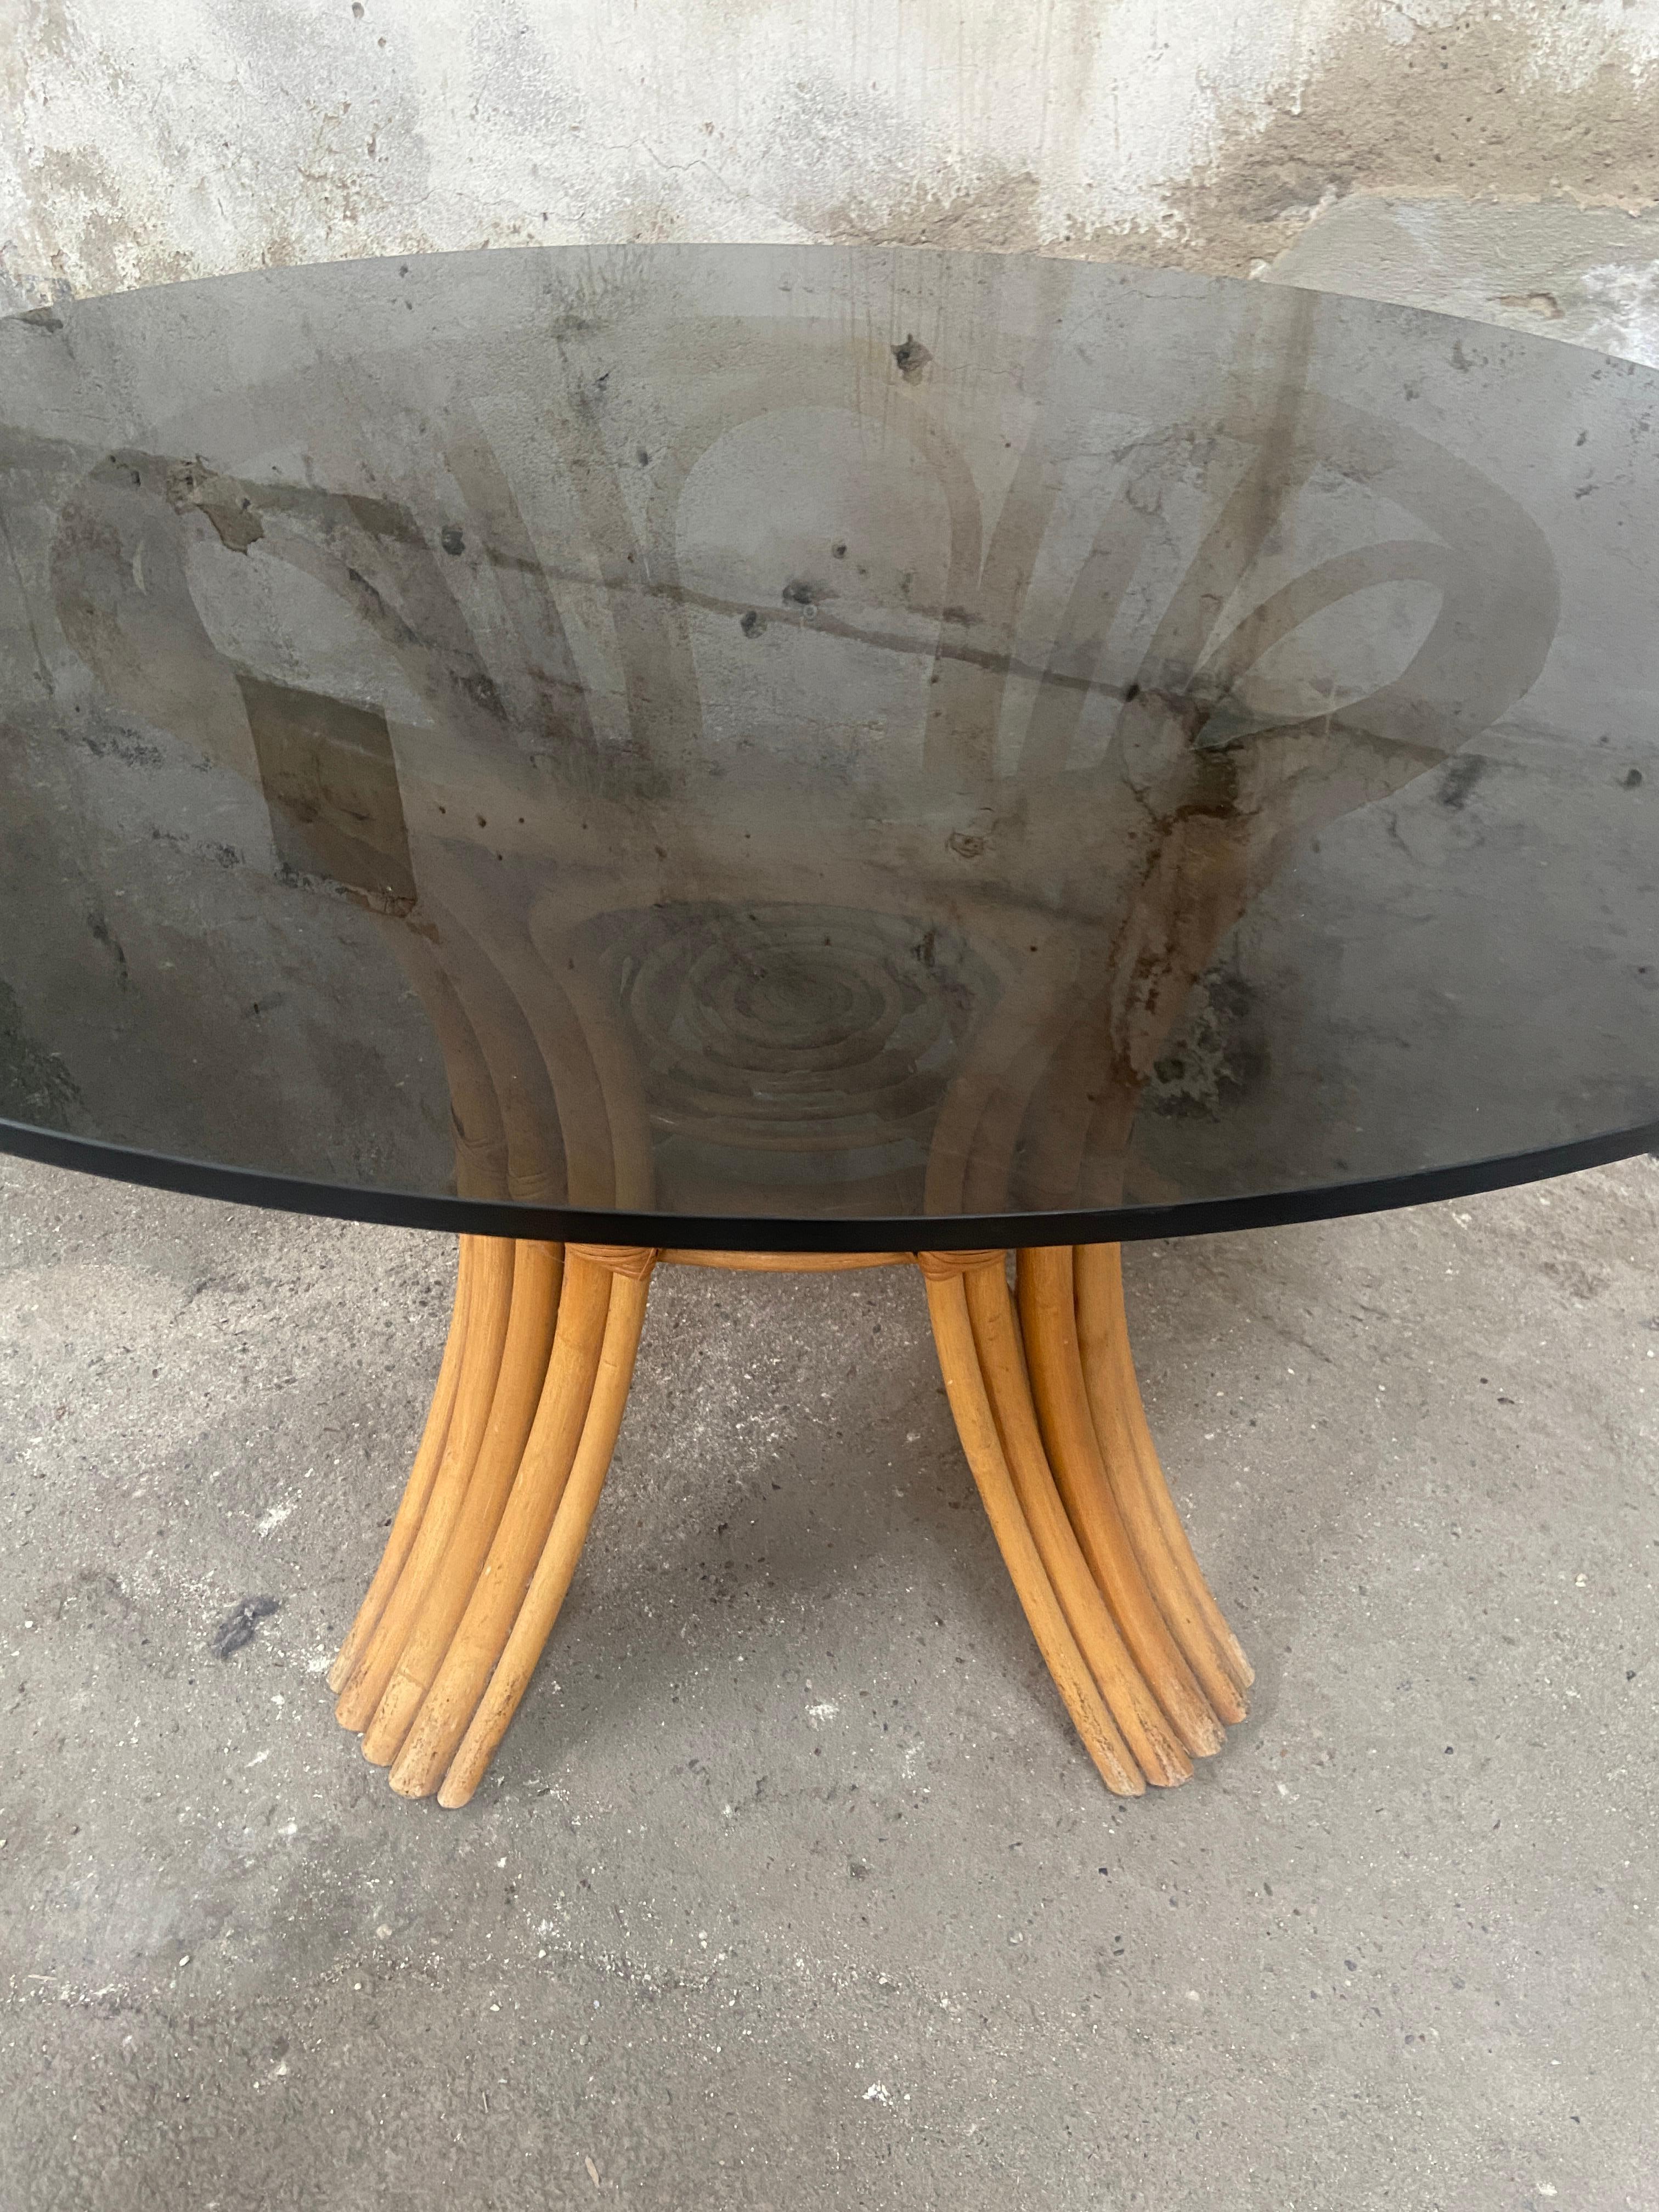 Mid-Cenruty Modern Italian Bamboo Table with Smoked Glass Top, 1970s For Sale 2